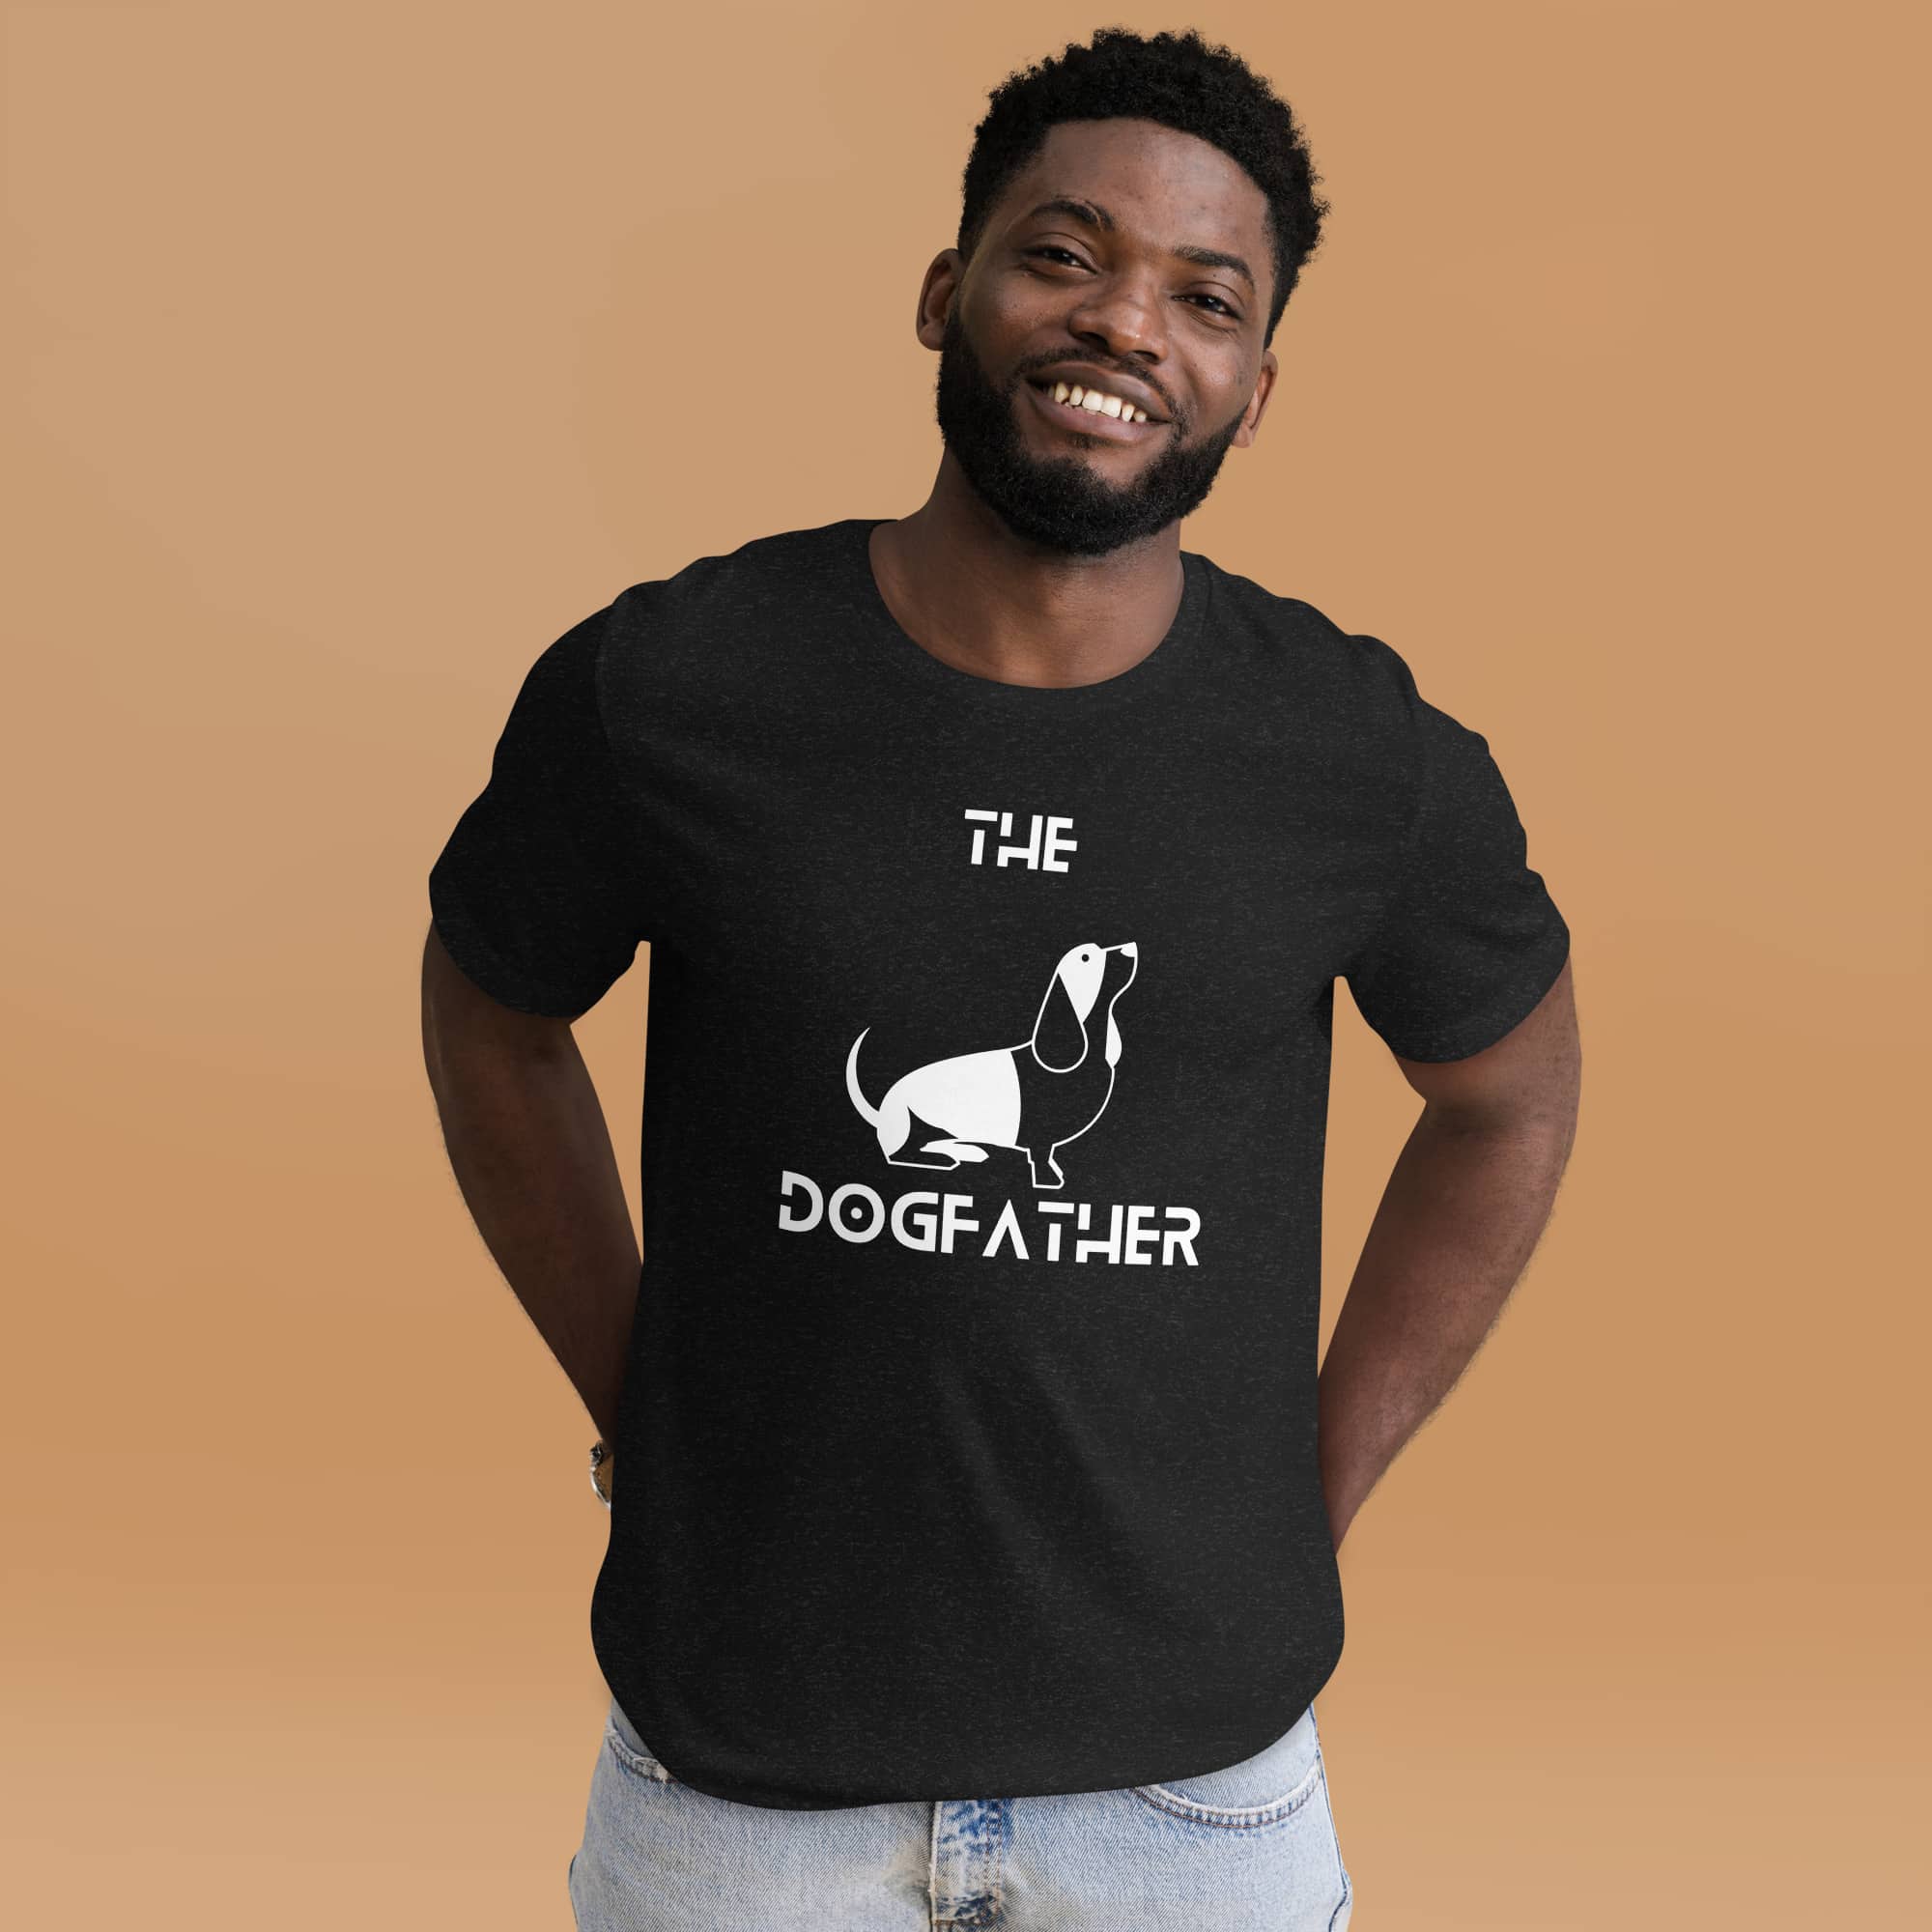 The Dogfather Hounds Unisex T-Shirt. Black Heather. Male